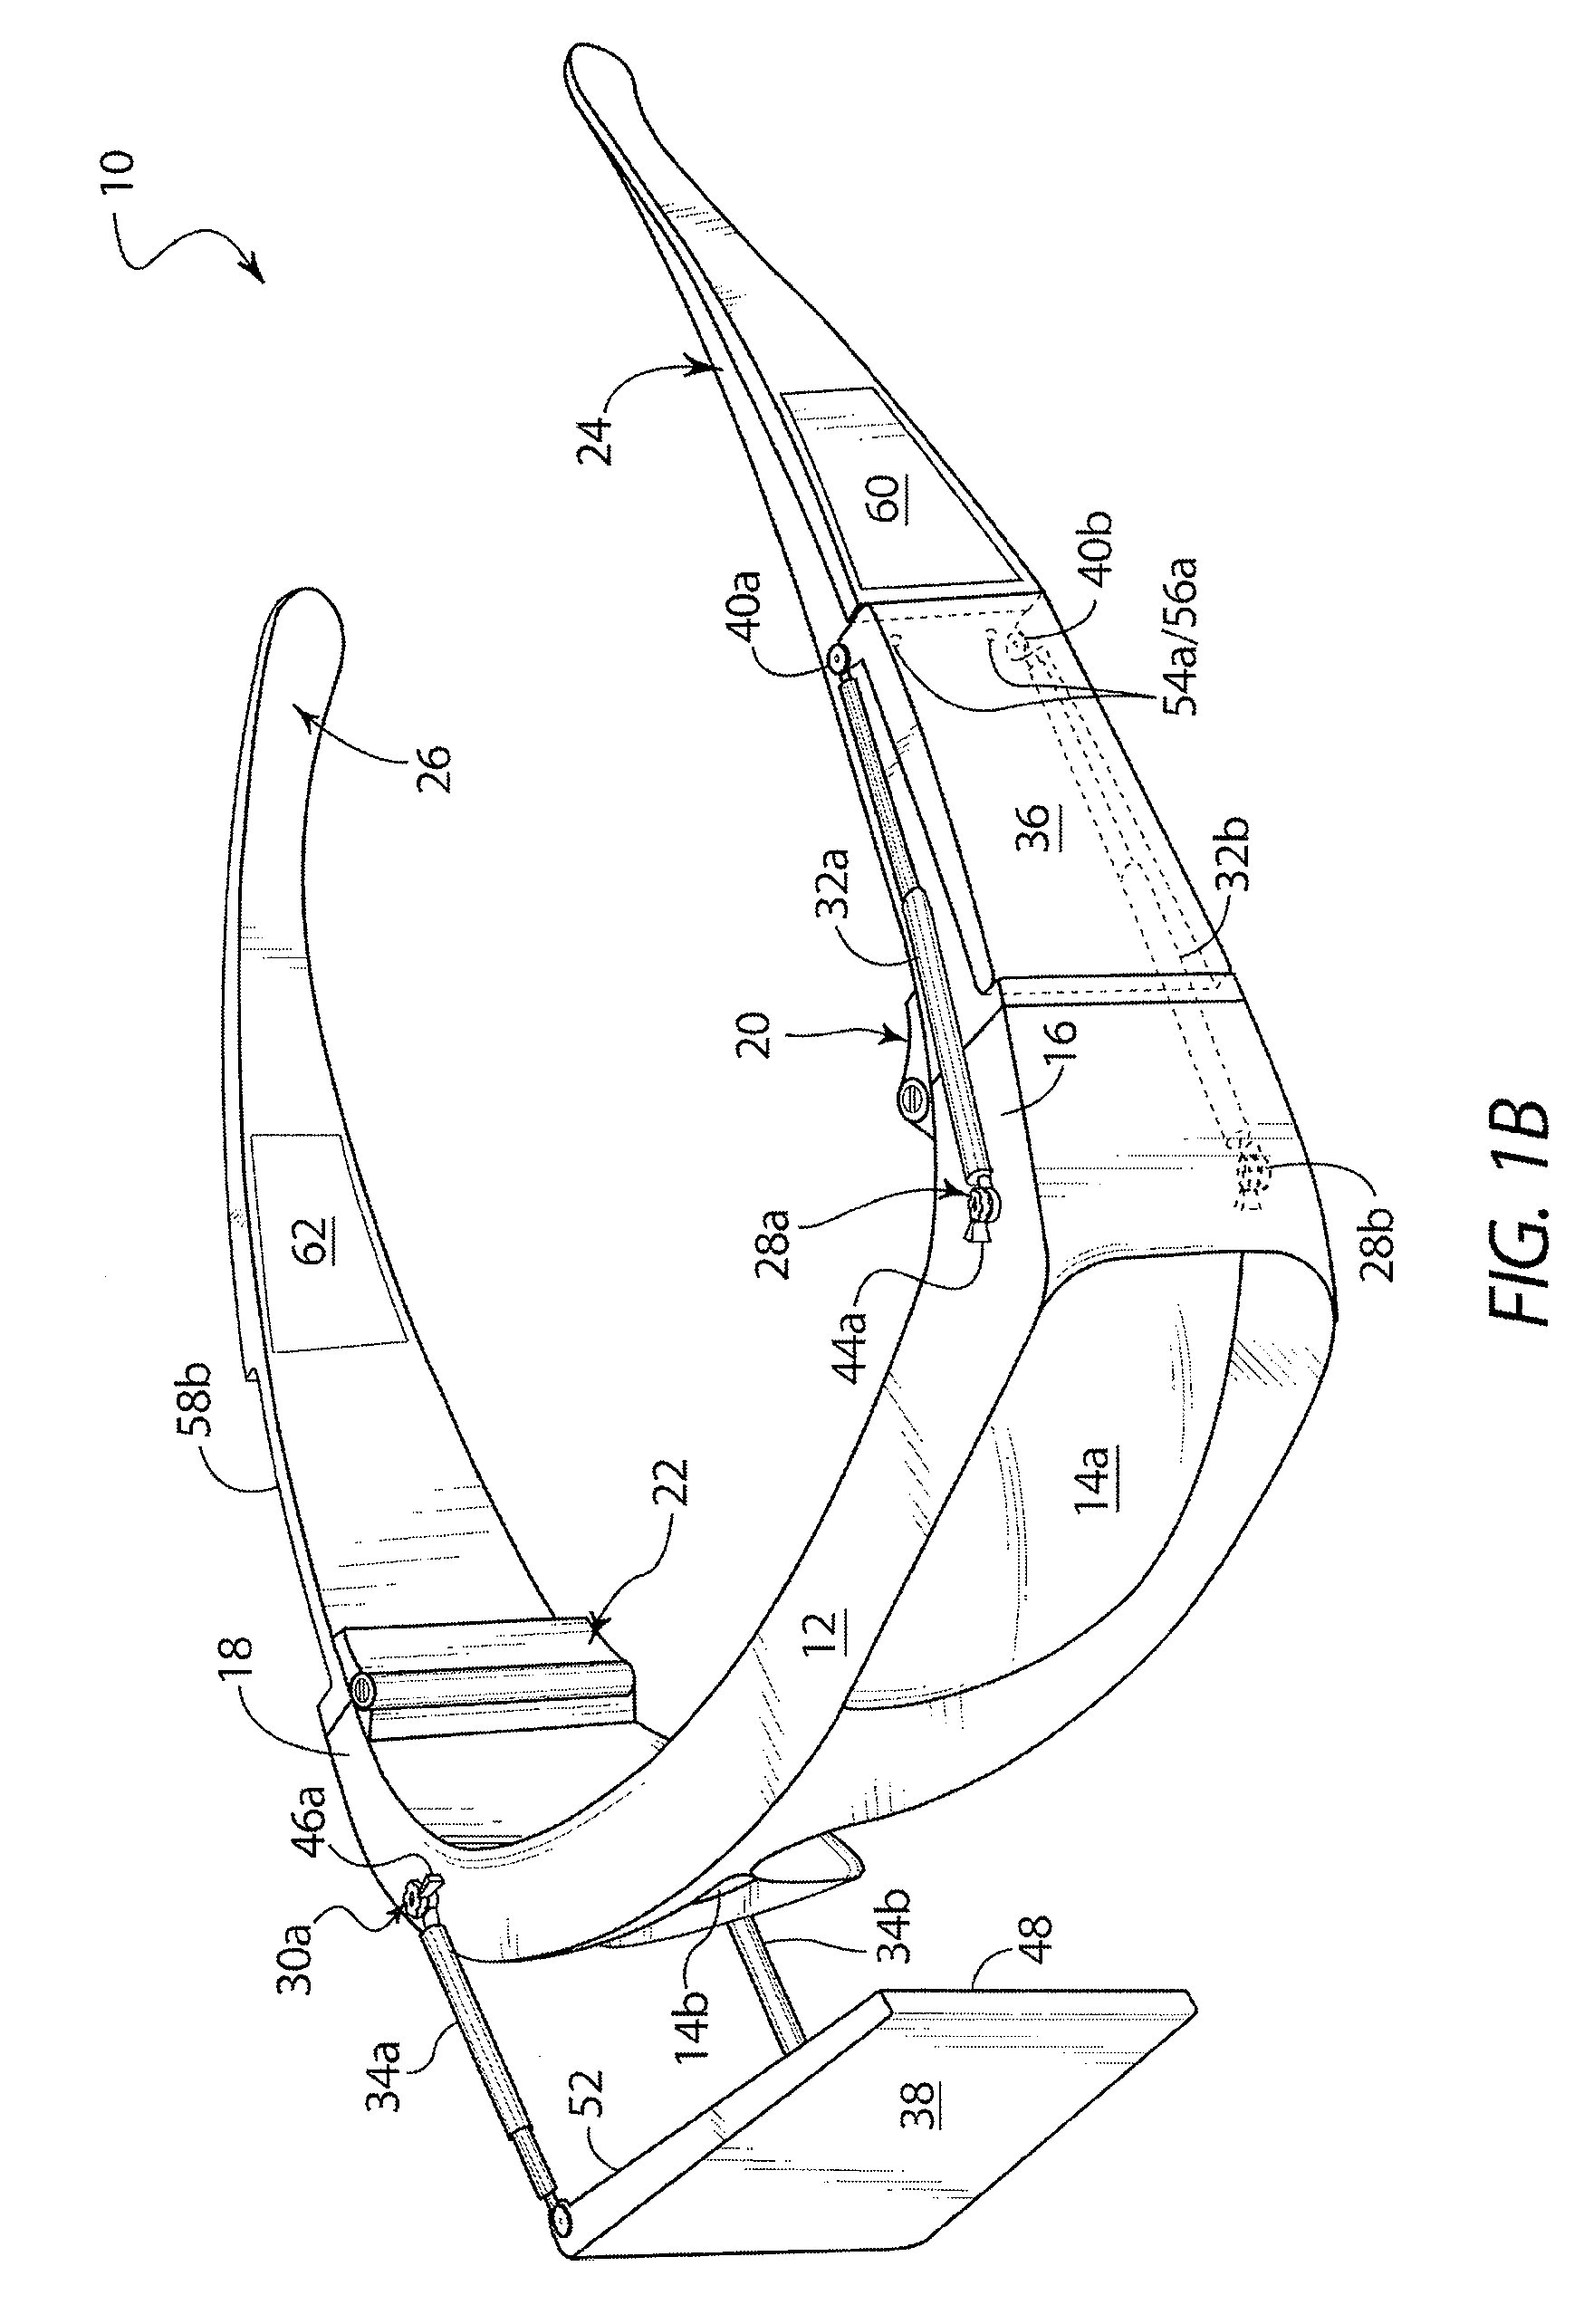 Eyeglasses with integrated telescoping video display